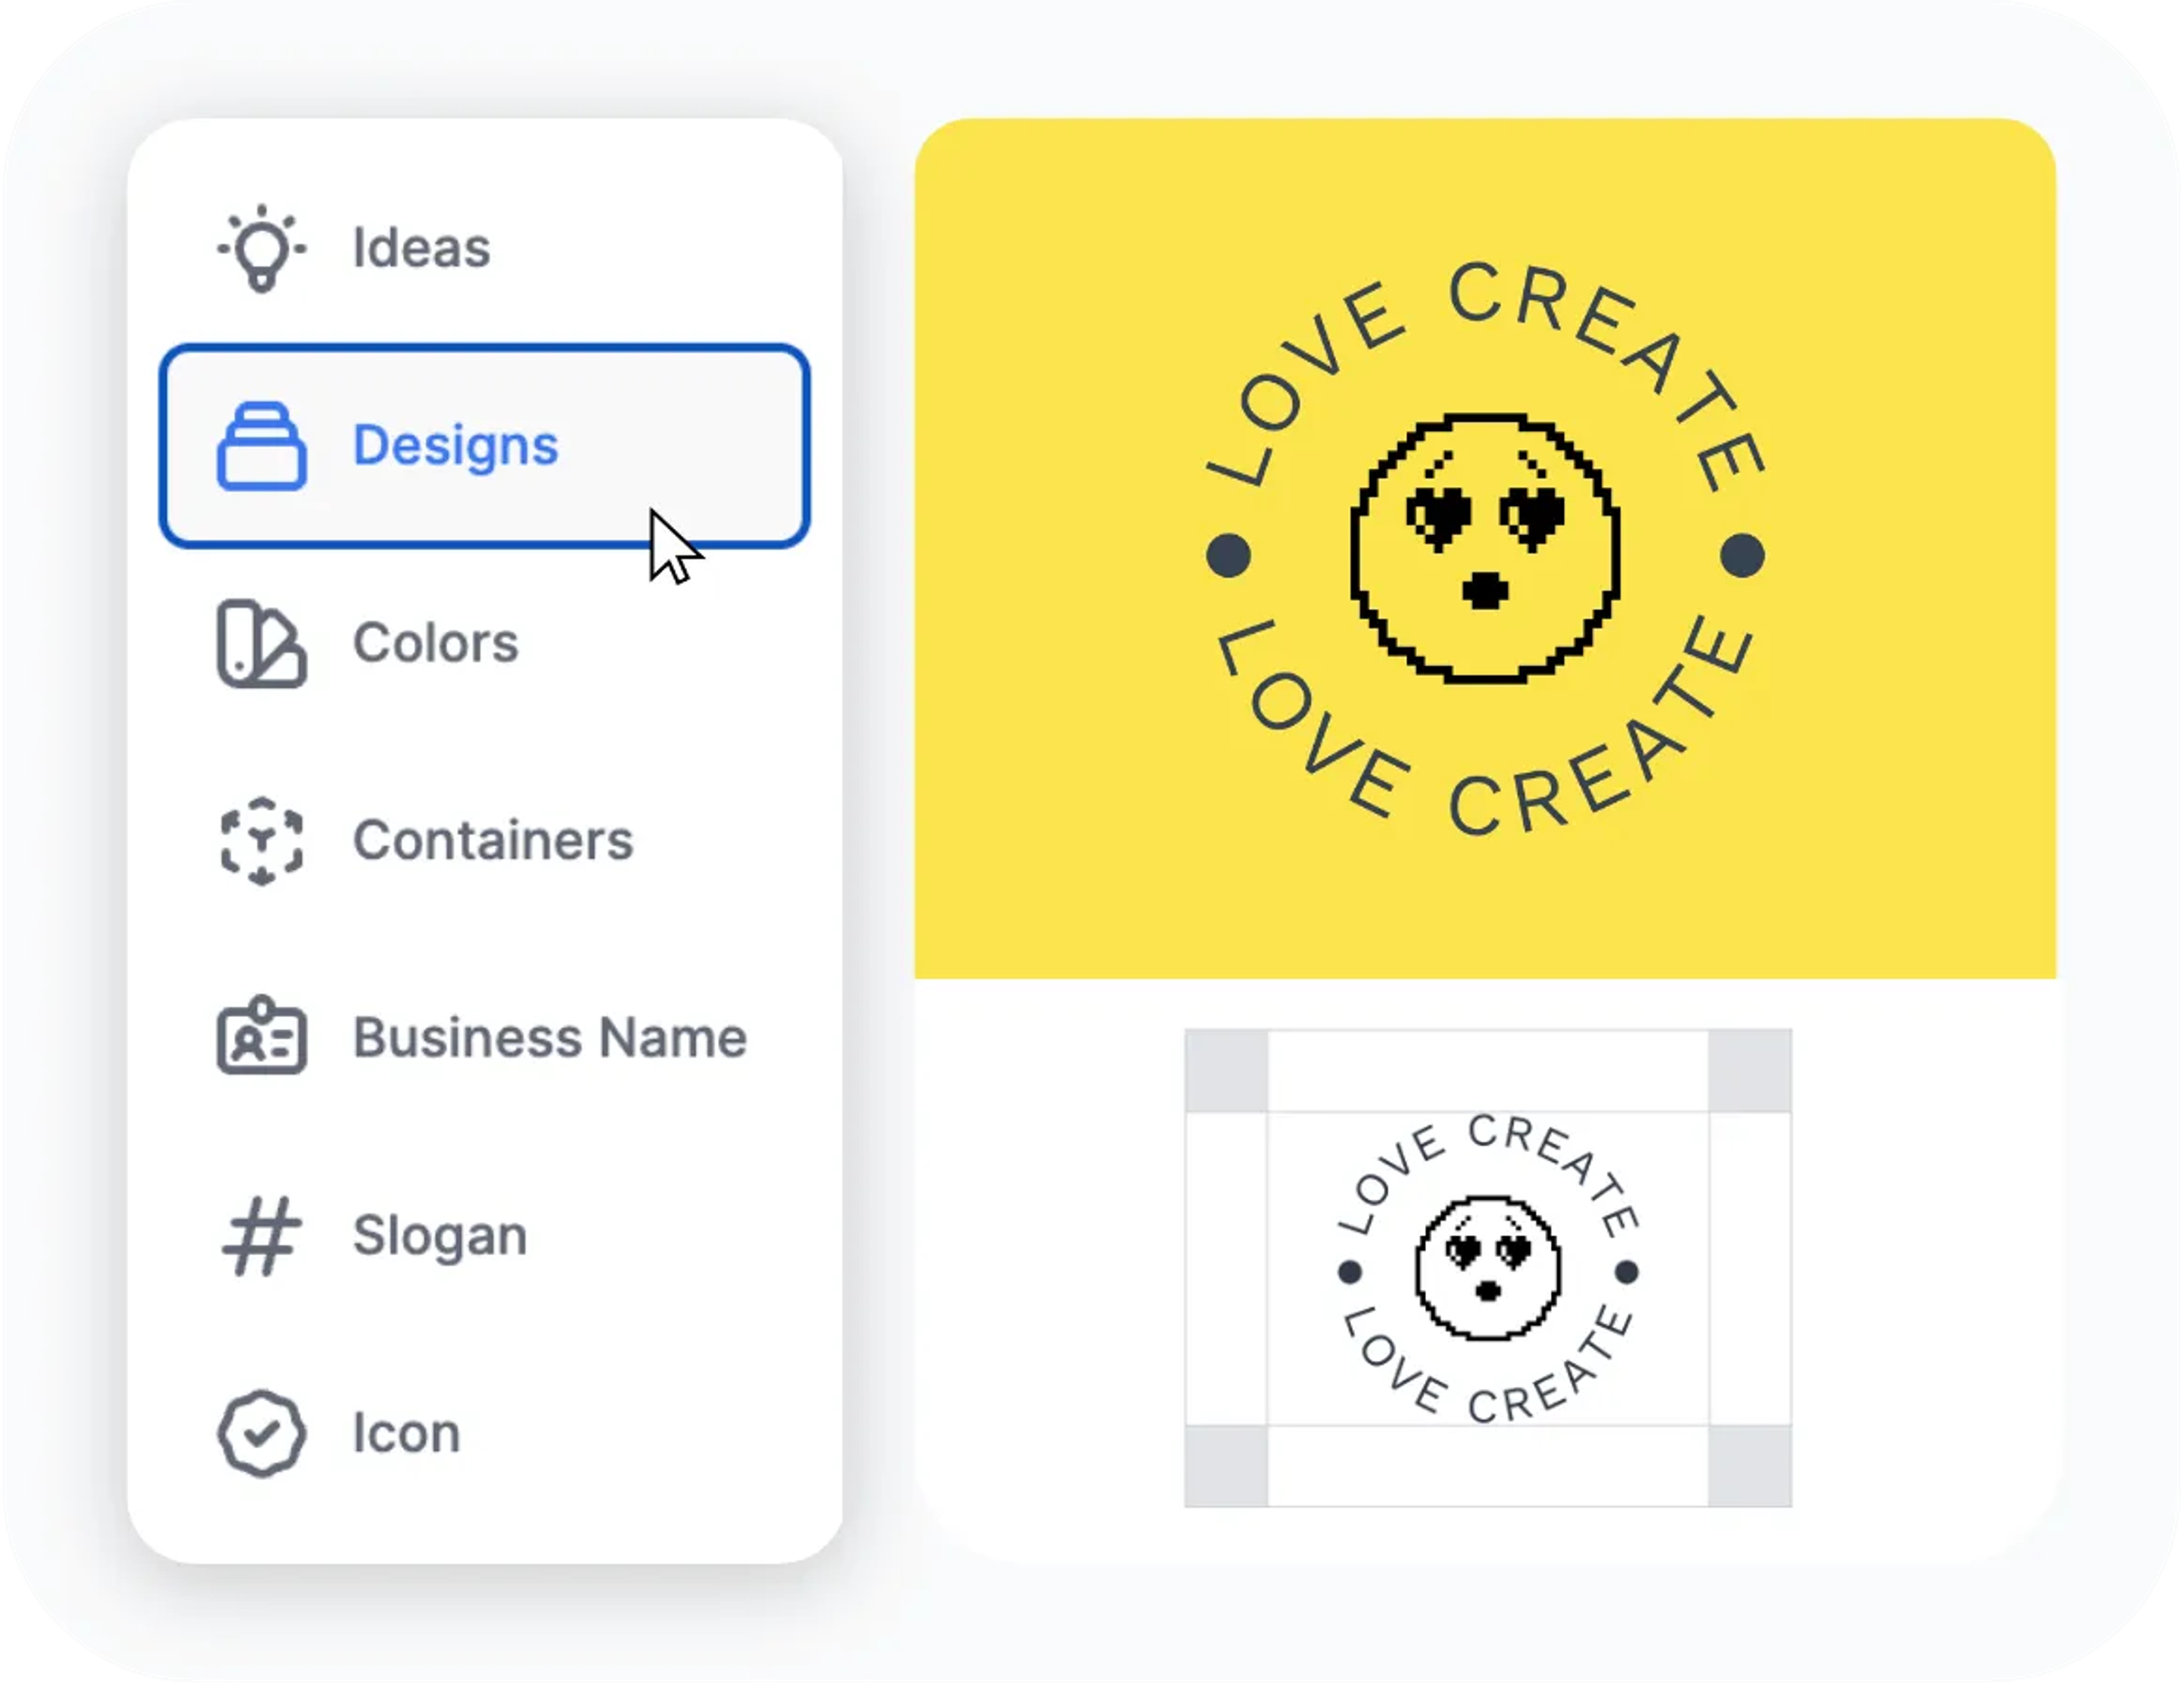 Step 1: Create and download your free logo.